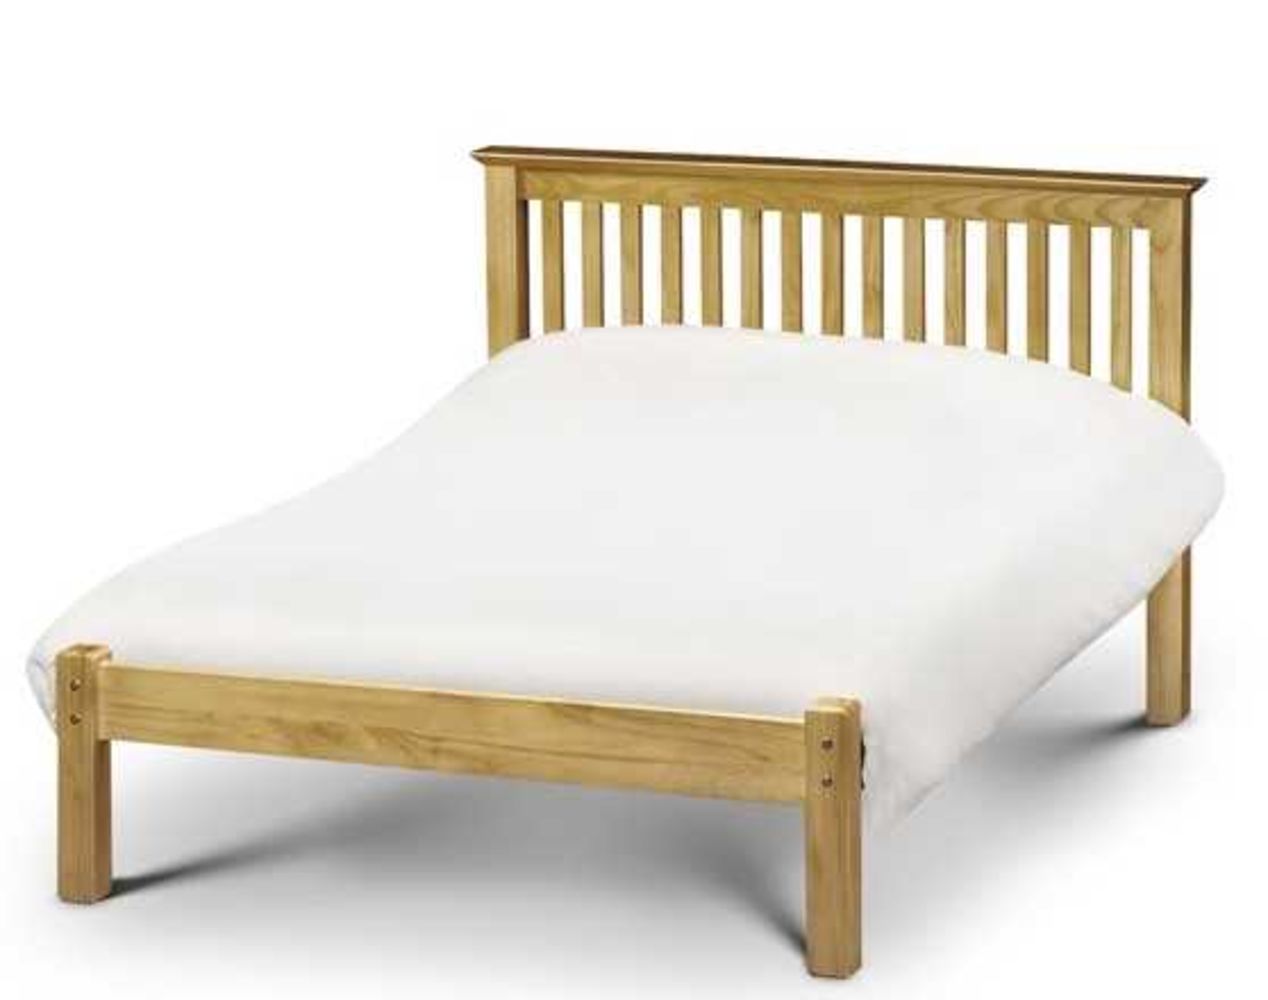 Beds and Mattresses from Carpet Right and More